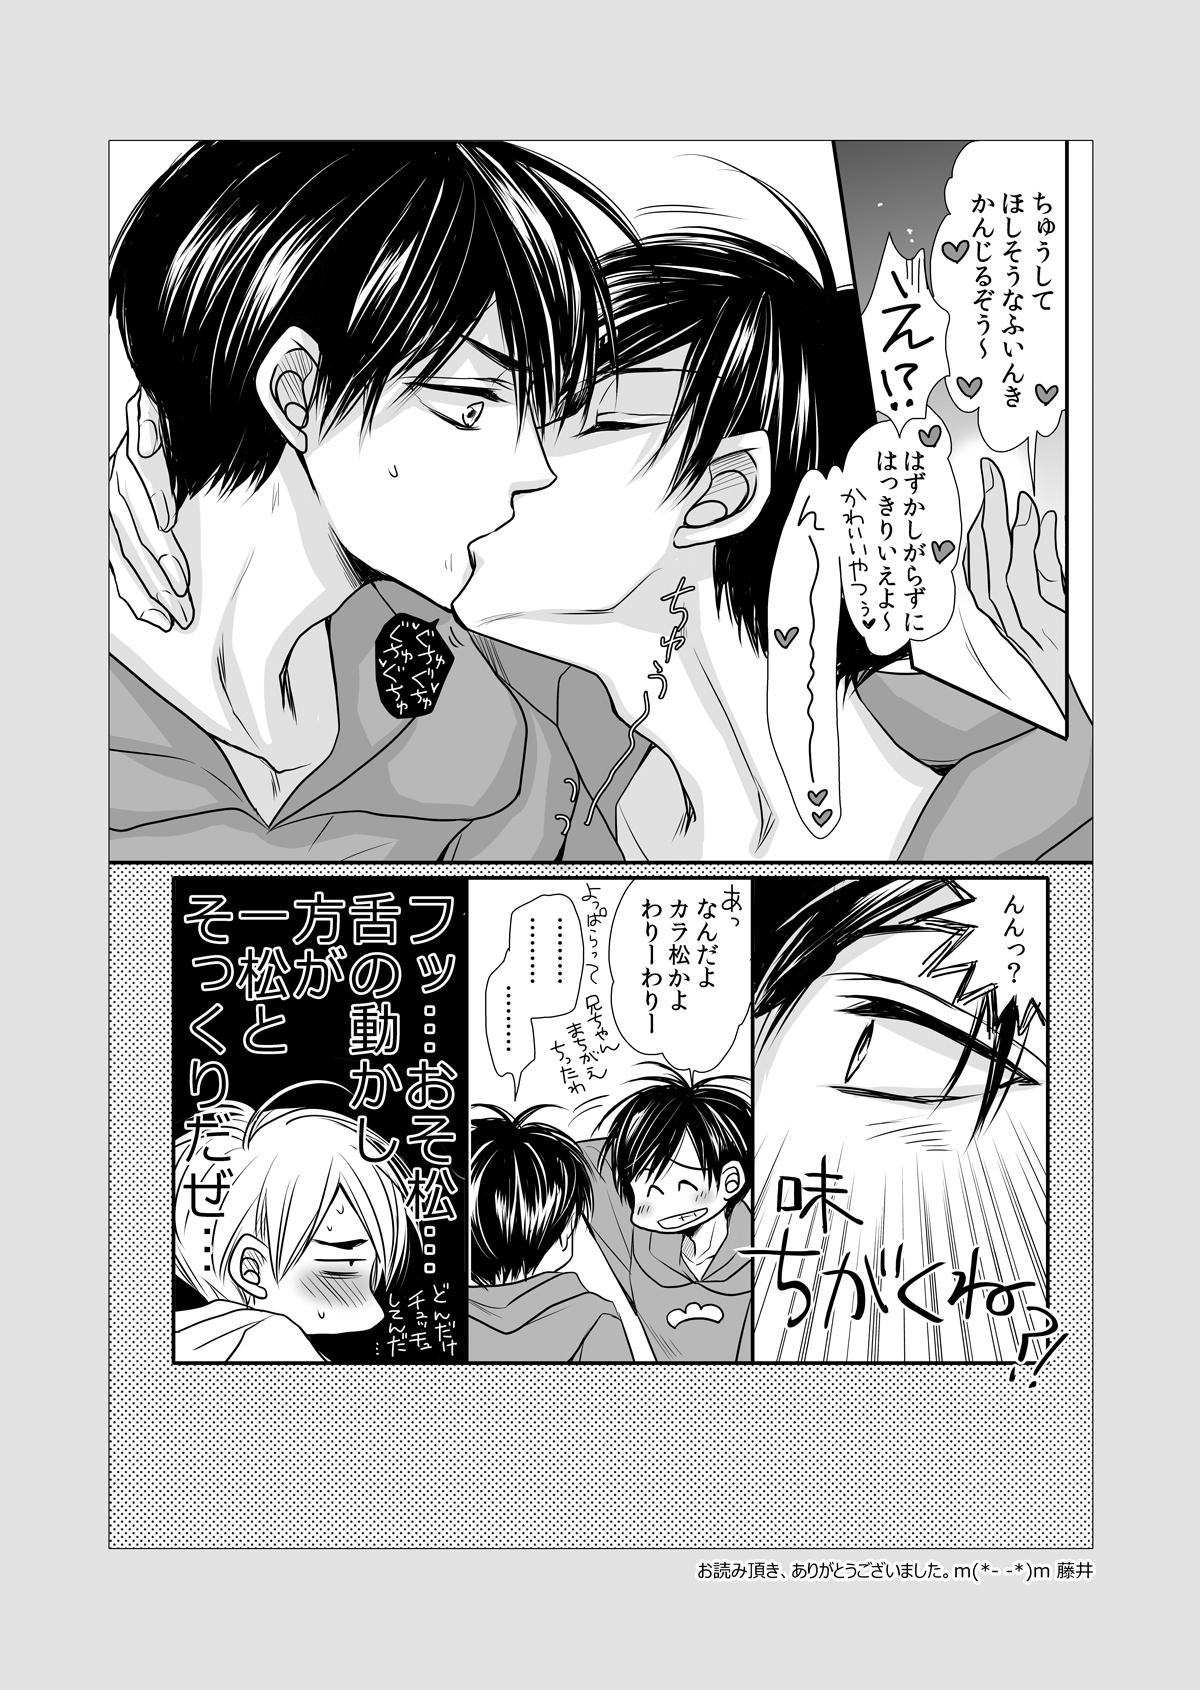 Spooning One Night Rendevous - Osomatsu-san Relax - Page 25